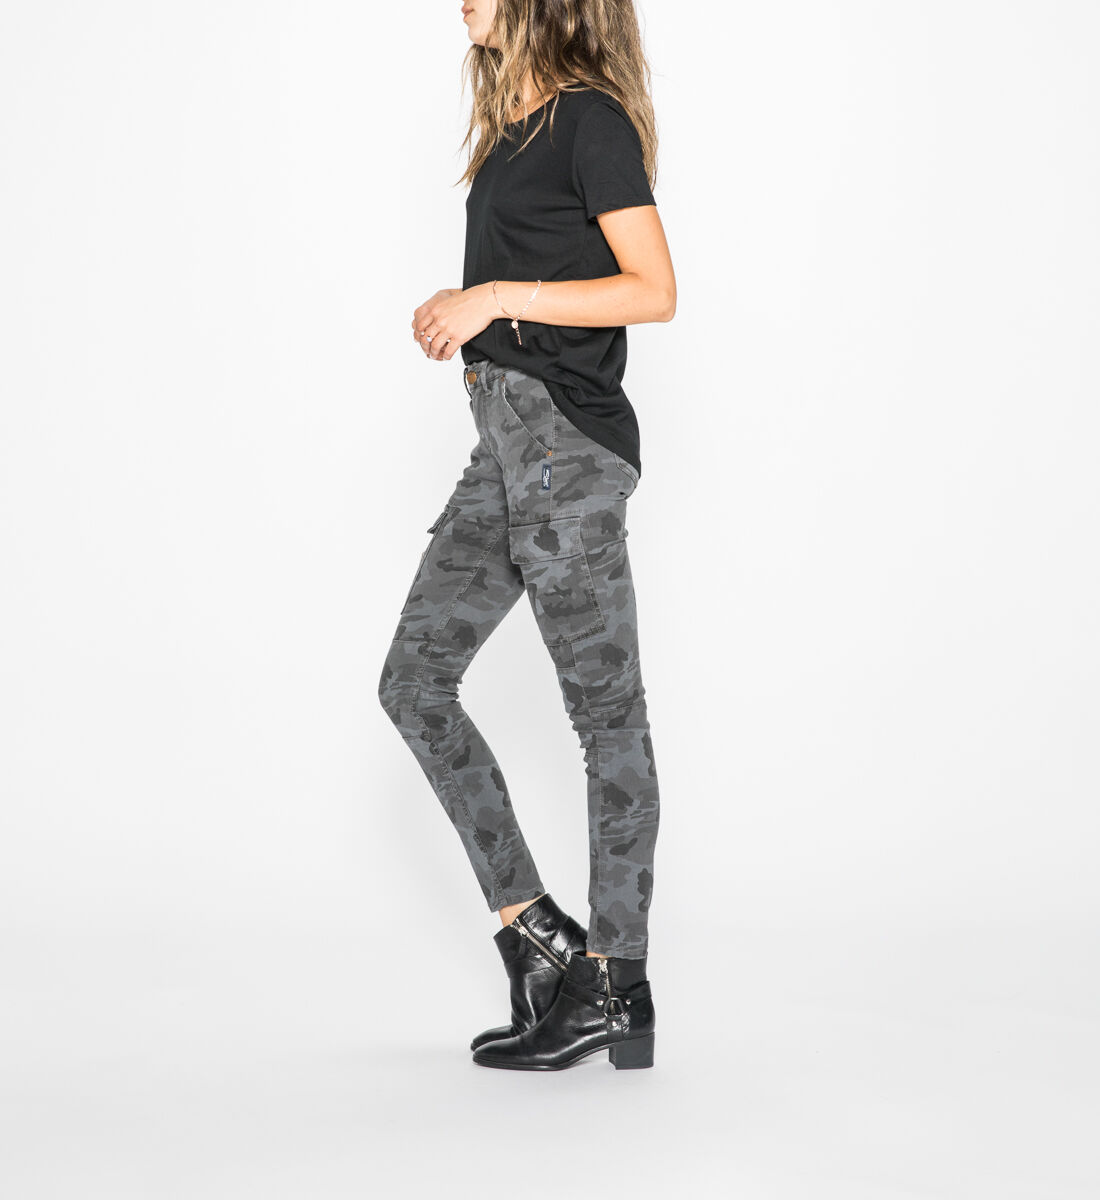 G Star G Star Tiger Camouflage Skinny Pants Green, $170 | Neiman Marcus |  Lookastic